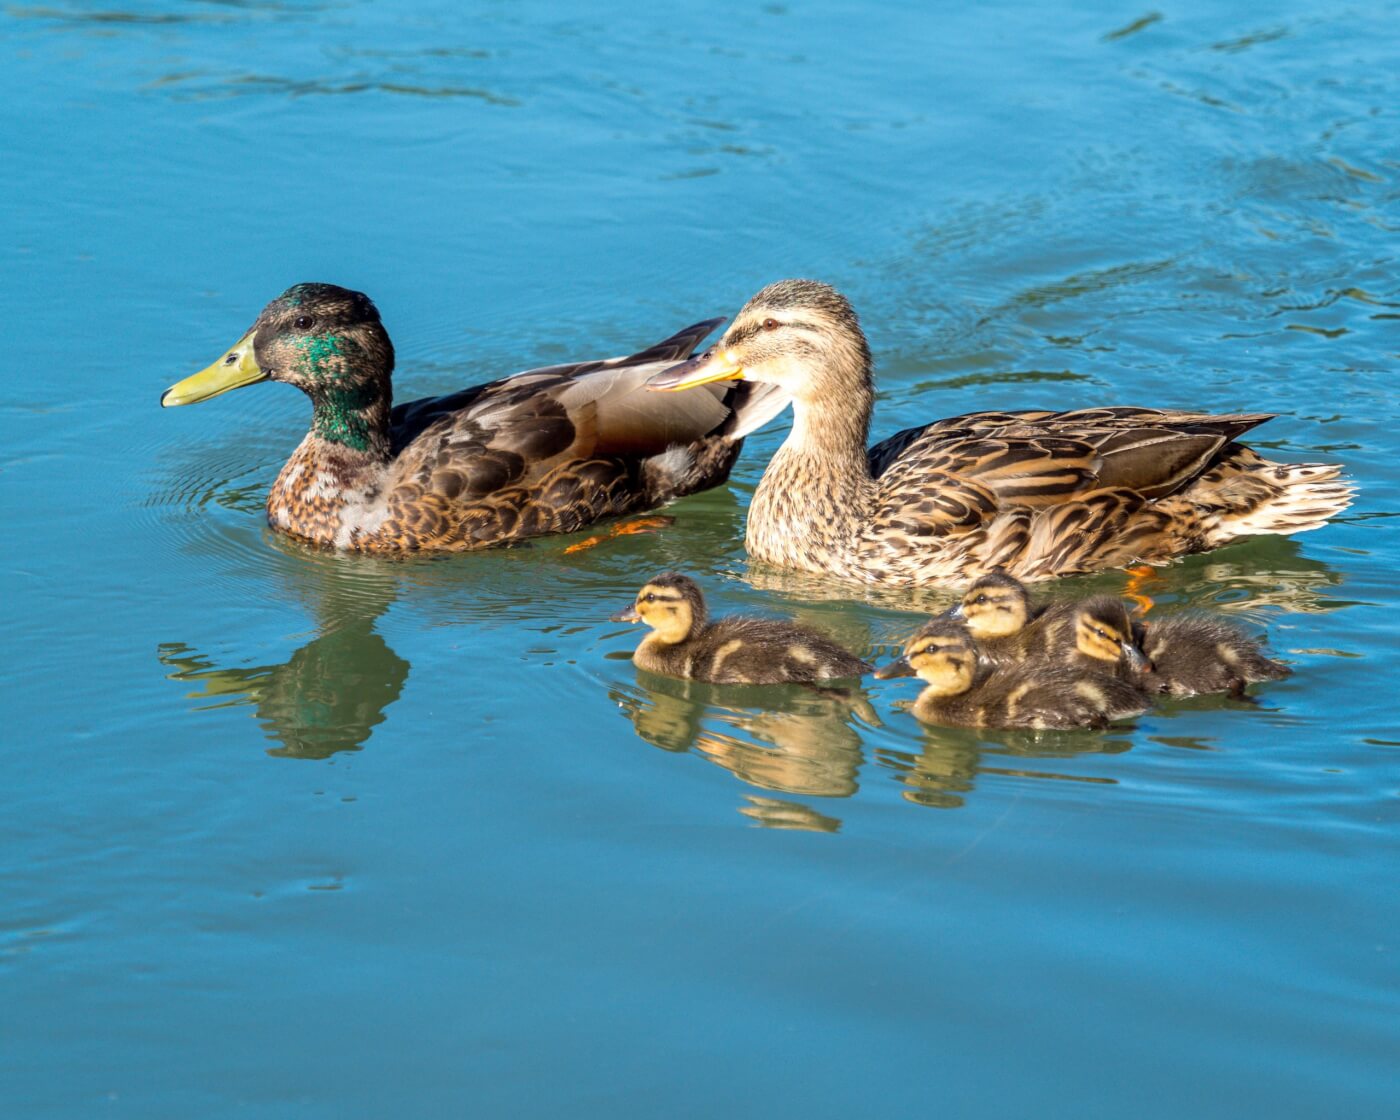 ANIMAL SCIENCE: Duck Life Cycle, Traits, Adaptations, and Animal